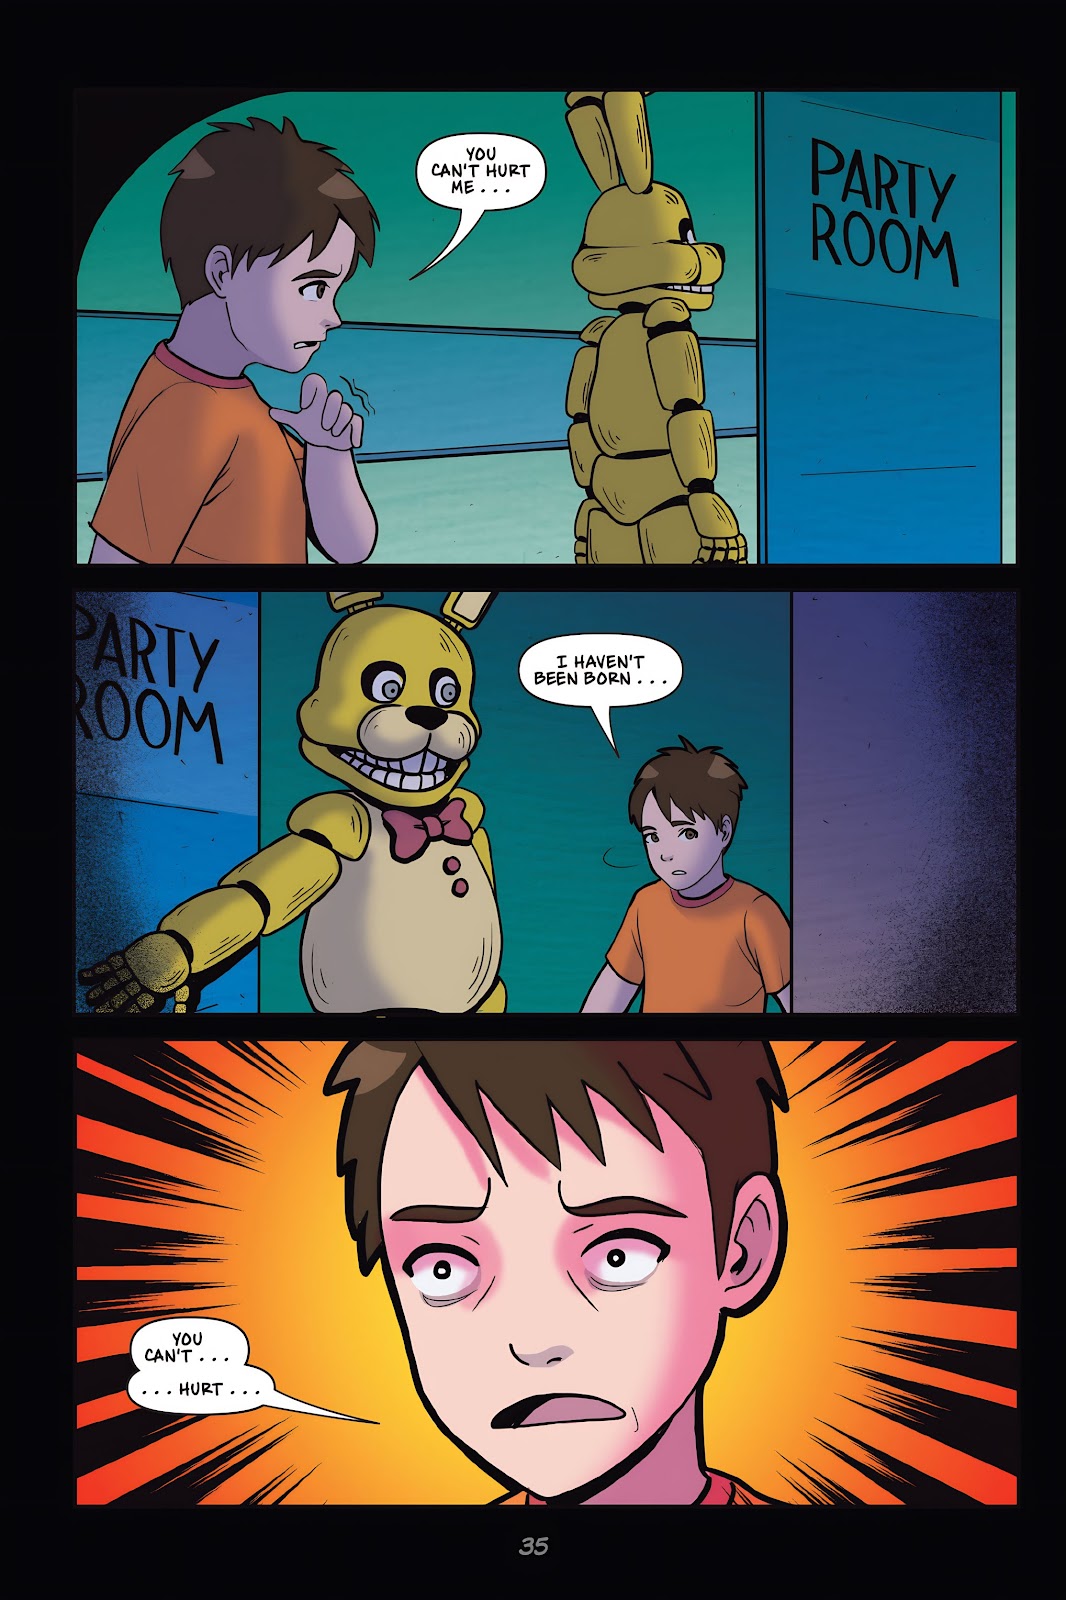 Five Nights at Freddy's: Fazbear Frights Graphic Novel Collection #TPB 1  (Part 2) - Read Five Nights at Freddy's: Fazbear Frights Graphic Novel  Collection Issue #TPB 1 (Part 2) Online